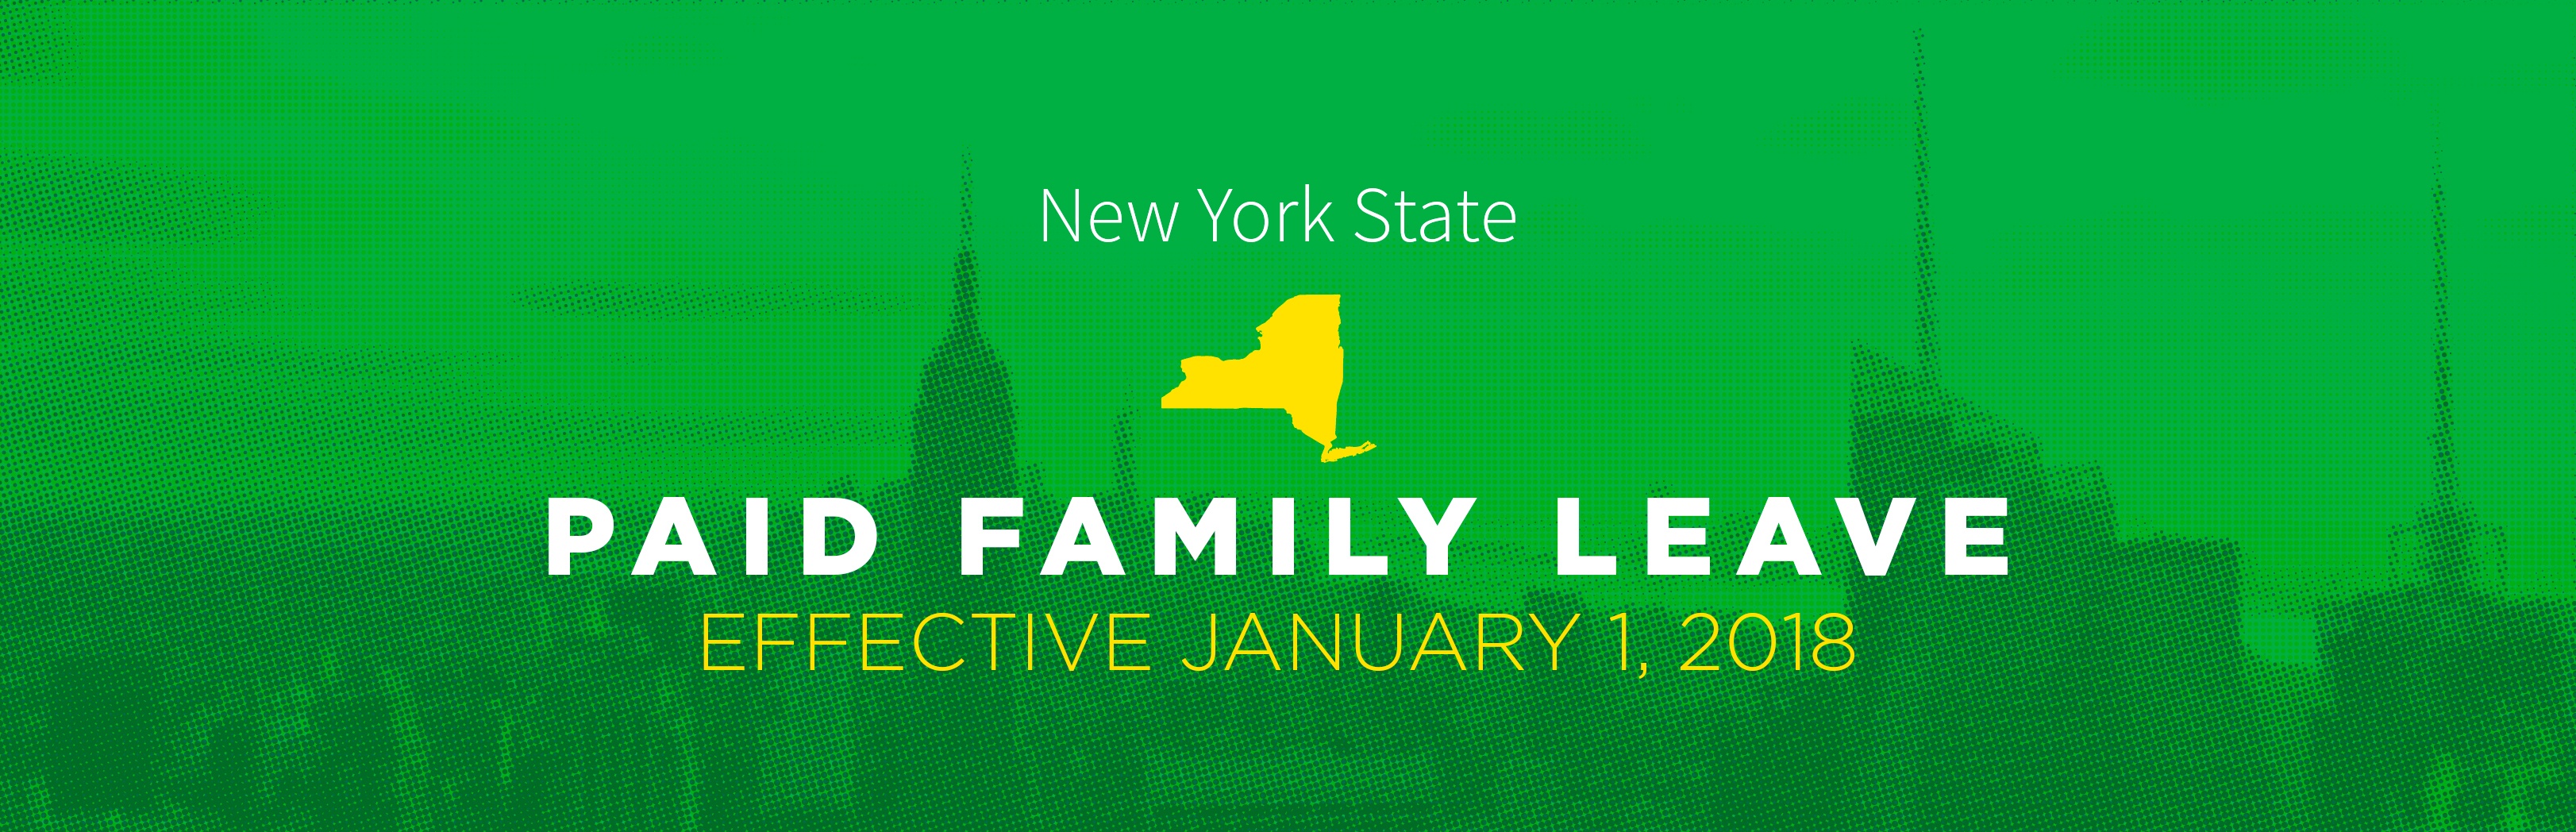 NEW YORK PAID FAMILY LEAVE WHAT YOU NEED TO KNOW FOR 2018